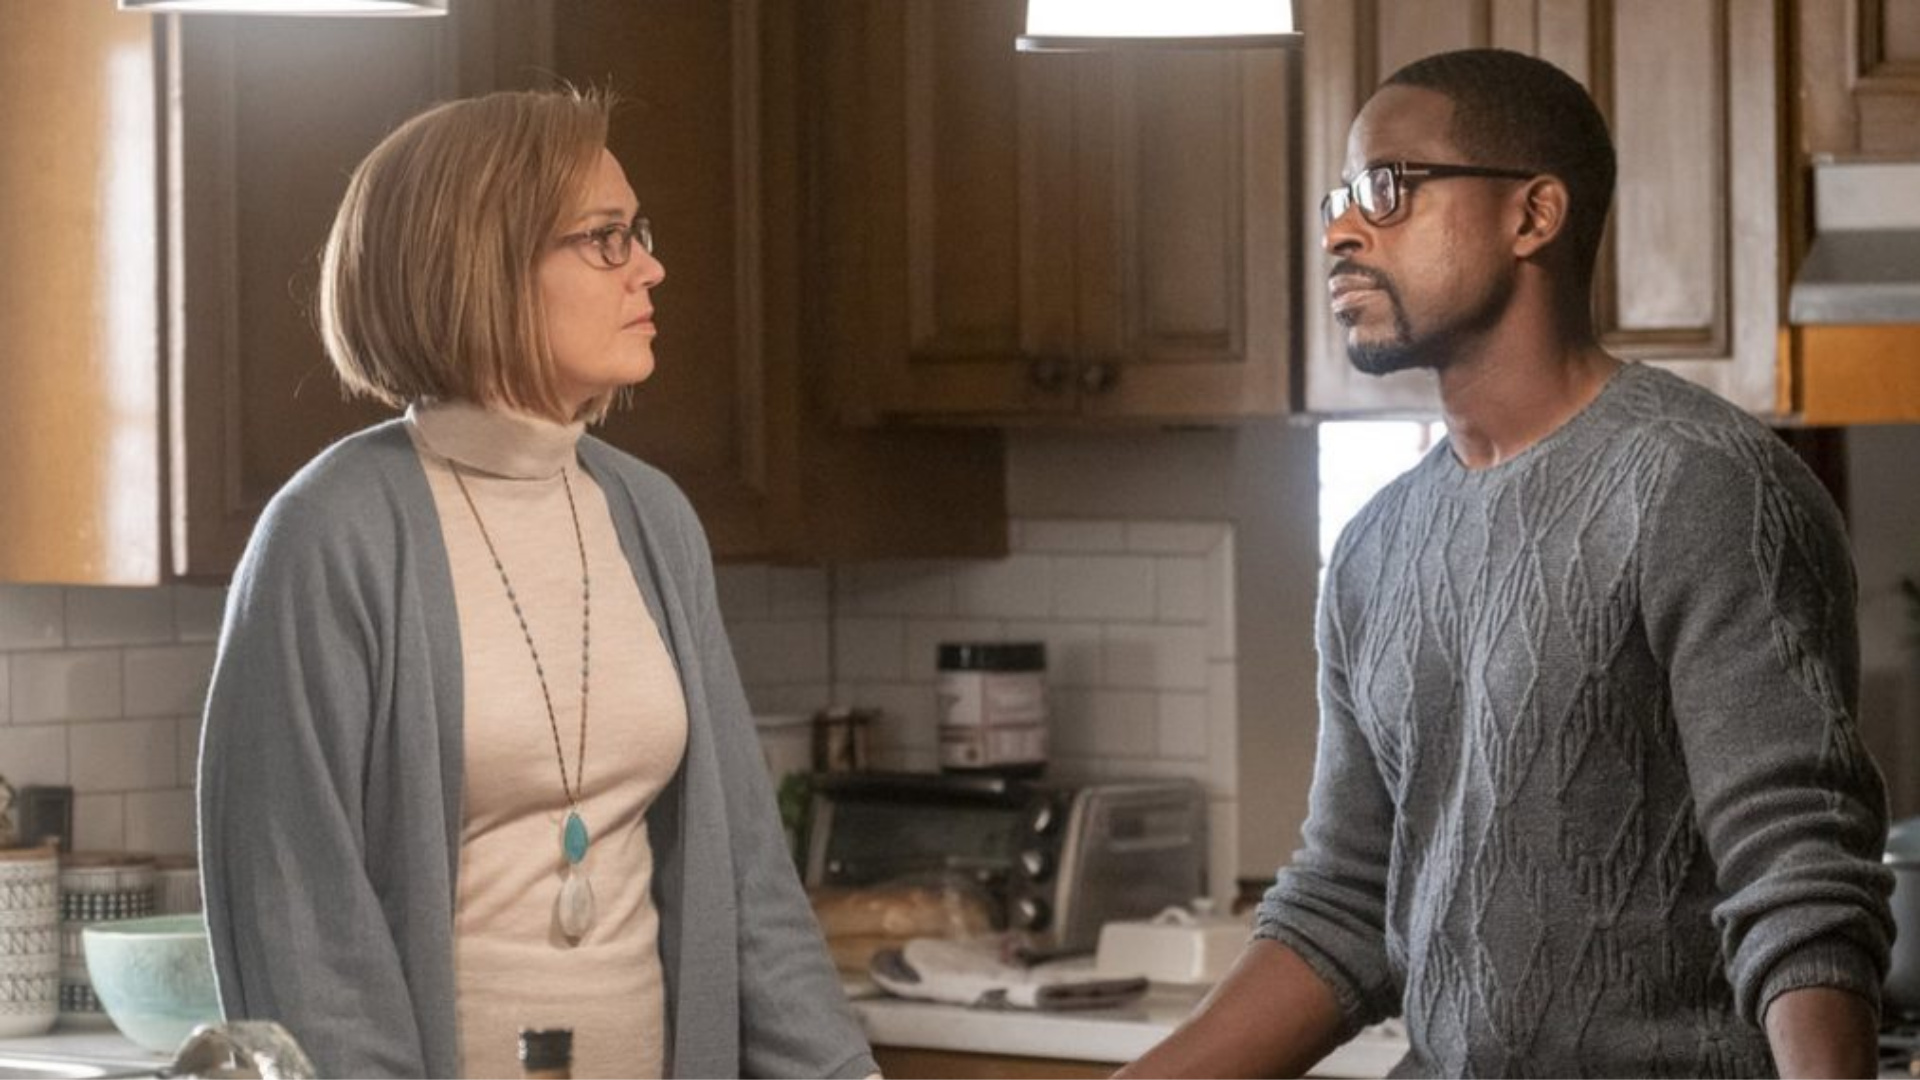 This Is Us Too: 4.09 – “So Long, Marianne” | FALL FINALE